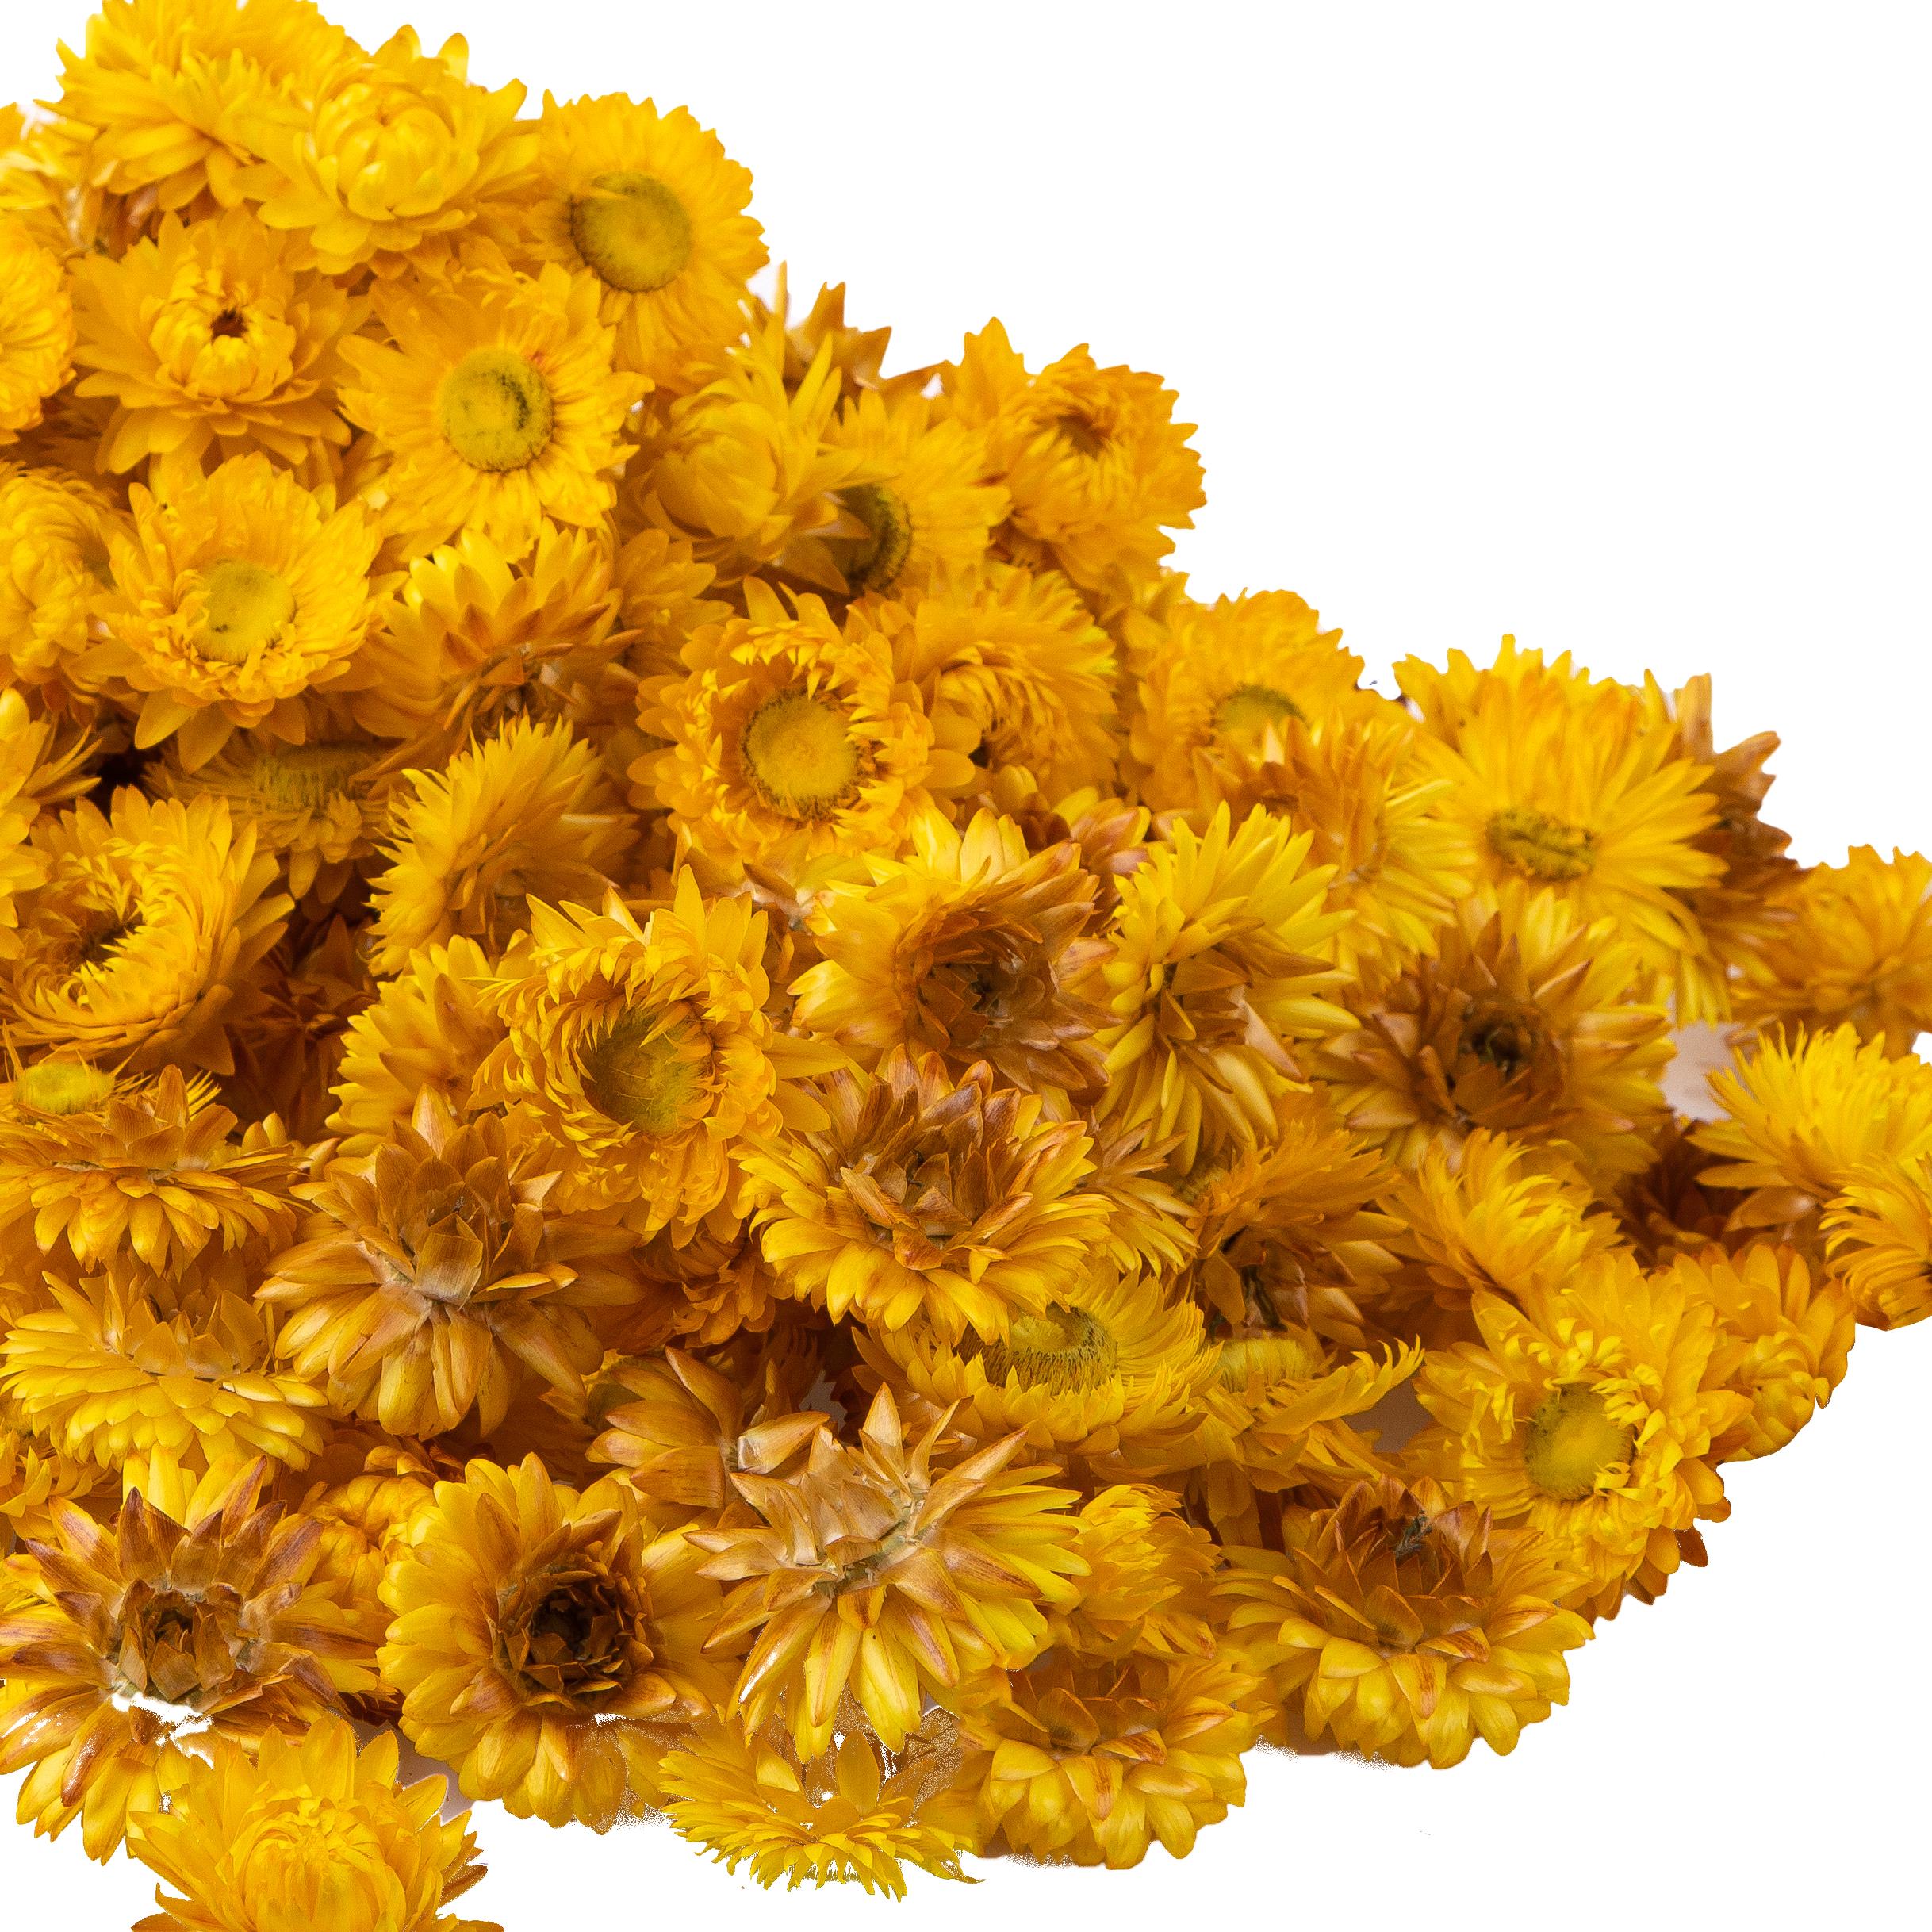 NATURAL PRODUCTS DRIED FLOWERS AND ERBS, FLOWERS, FRUITS AND NATURAL PROTEES, HELICHRYSUM TESTE A KG A CARTONE